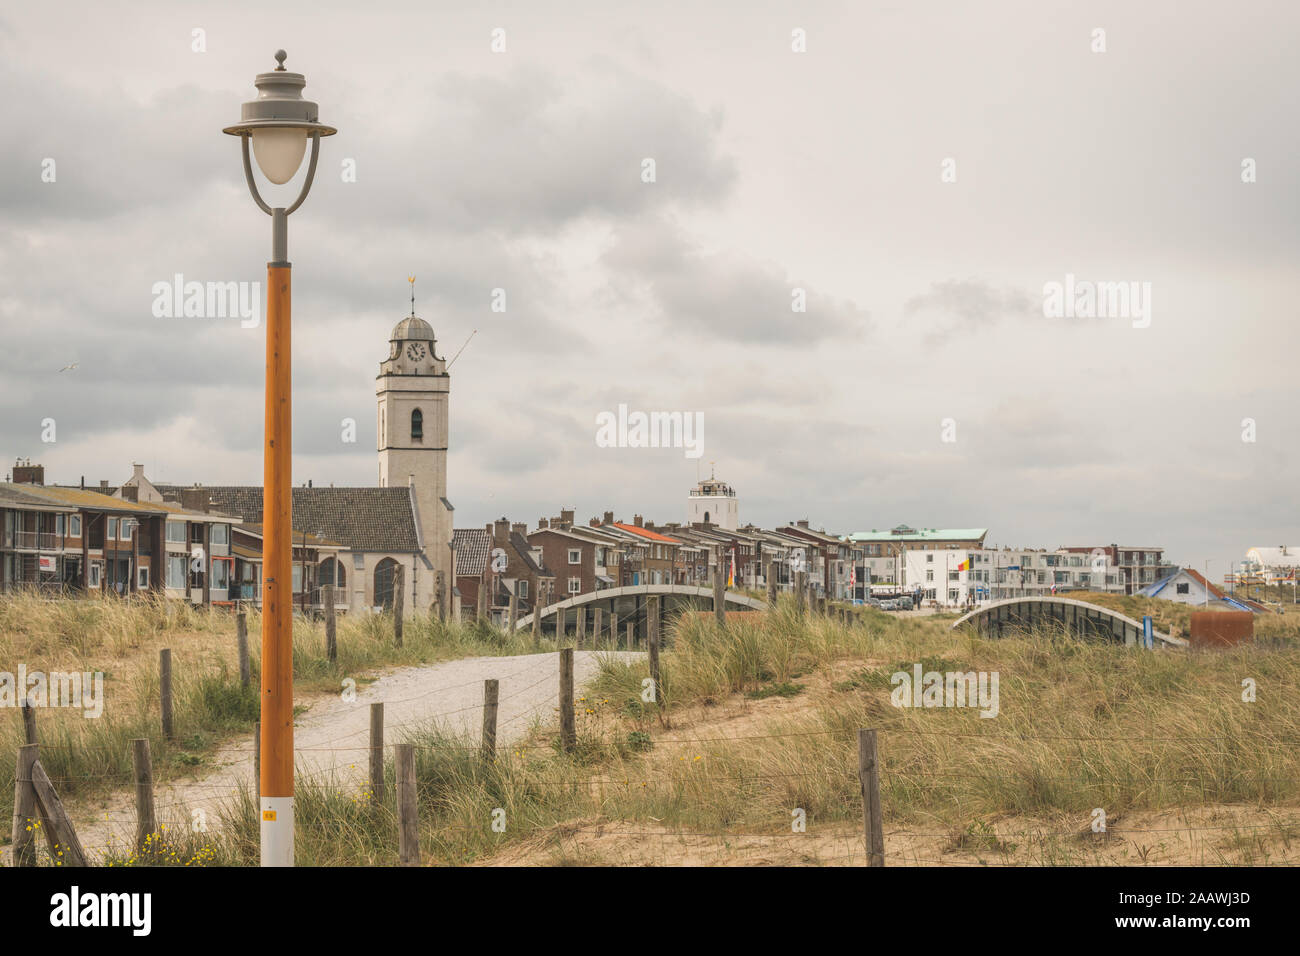 Netherlands, South Holland, Katwijk, townscape Stock Photo